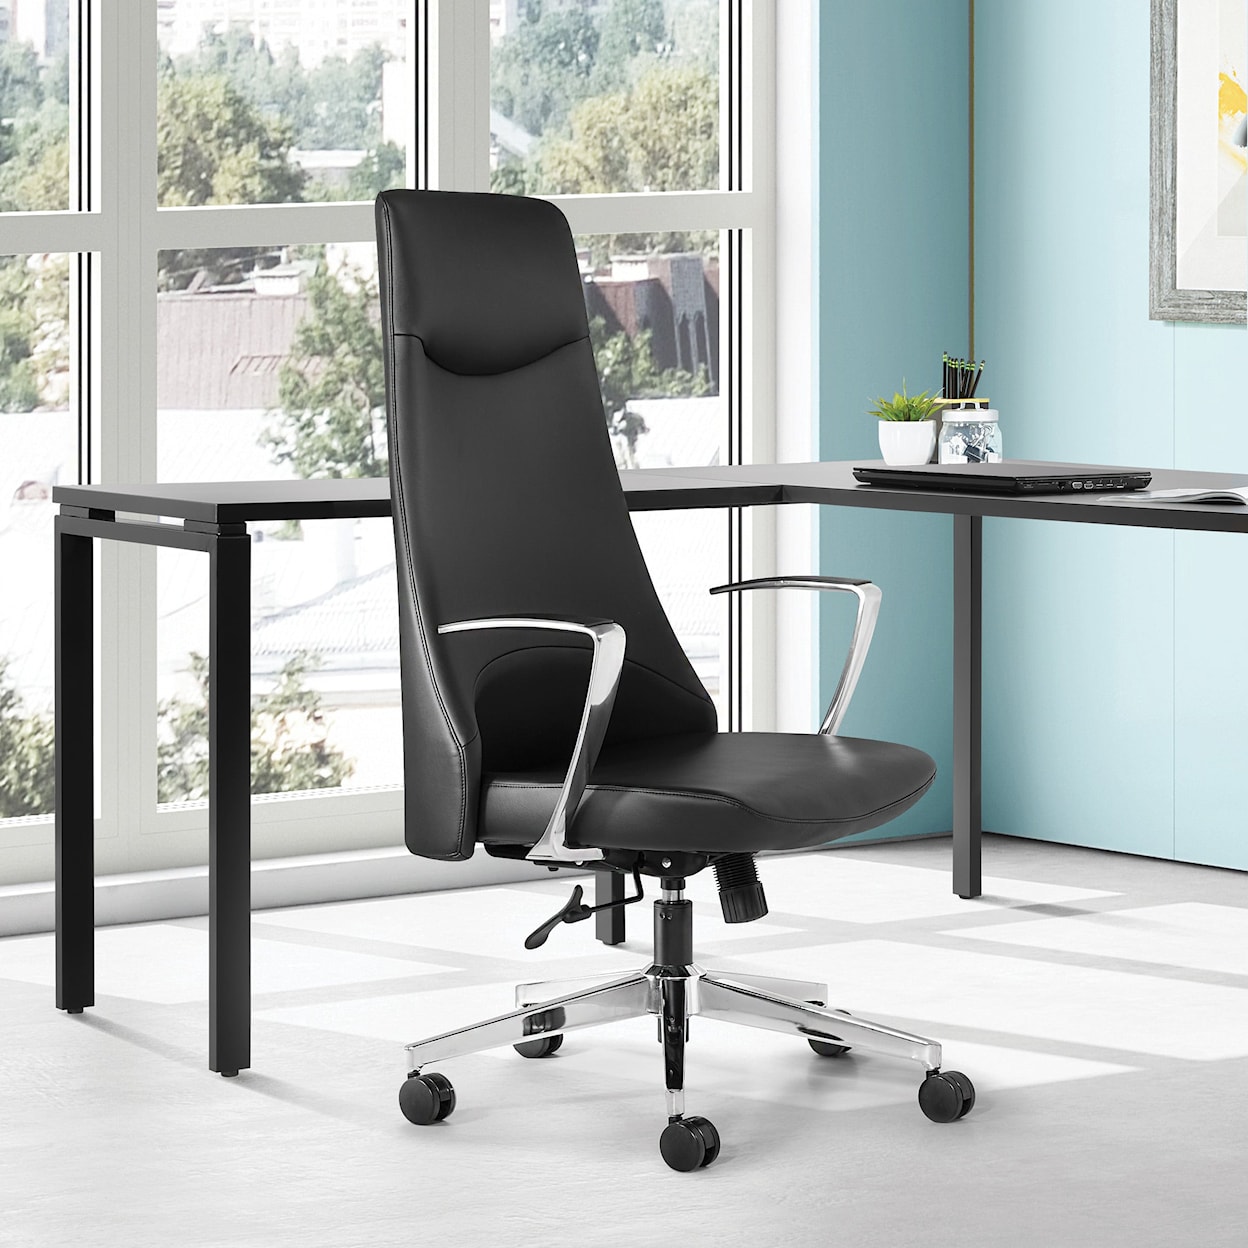 Office Star Antimicrobial Fabrics Series Office Chair